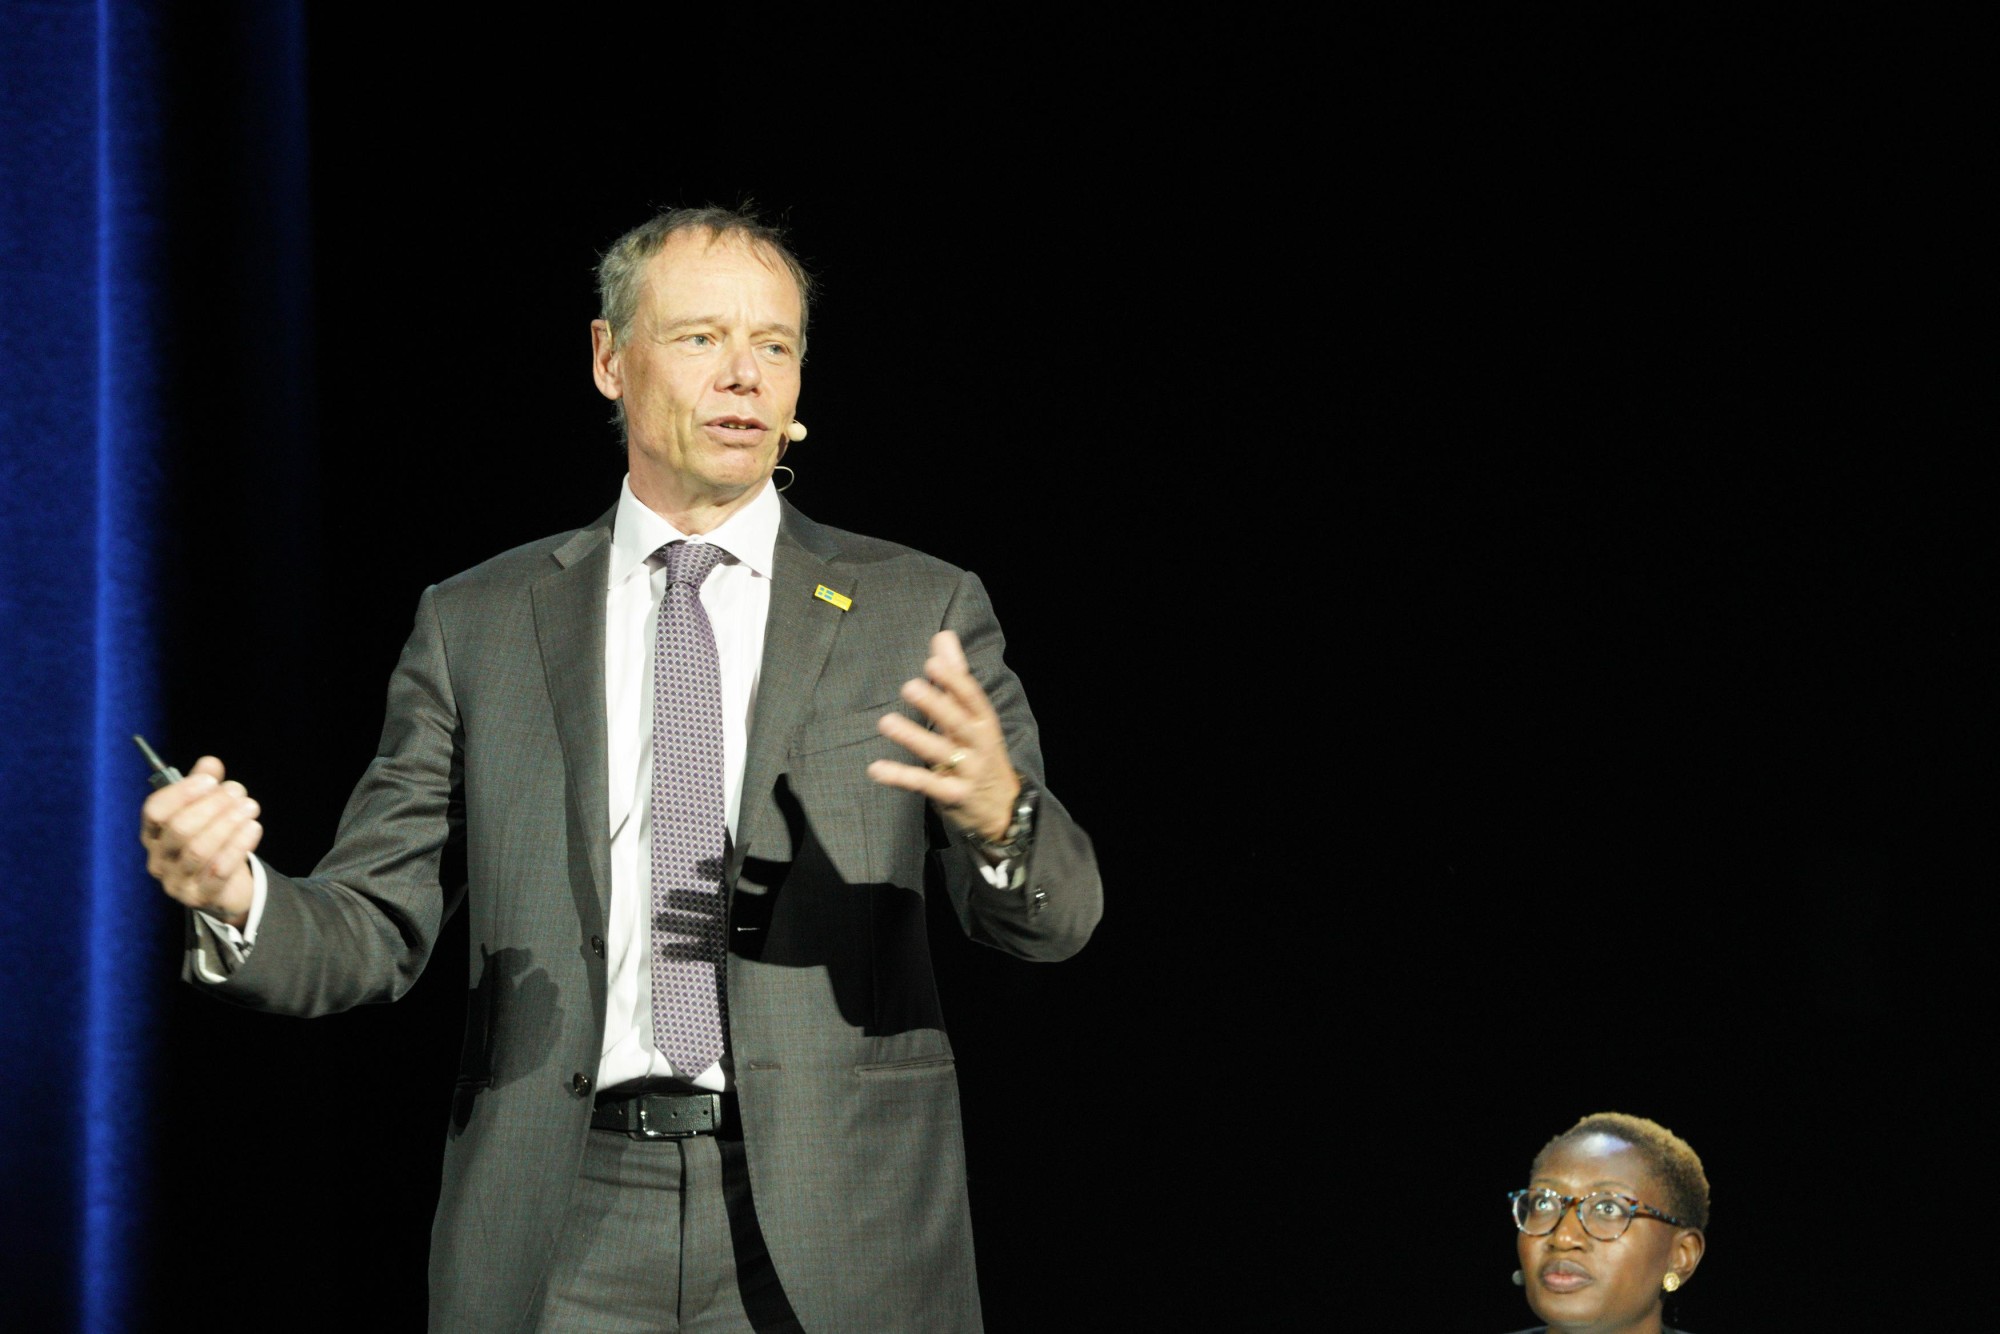 Swedish physicist and an ESA astronaut Christer Fuglesang speaks at Space Week event at Dubai Exhibition Centre Web Image m5